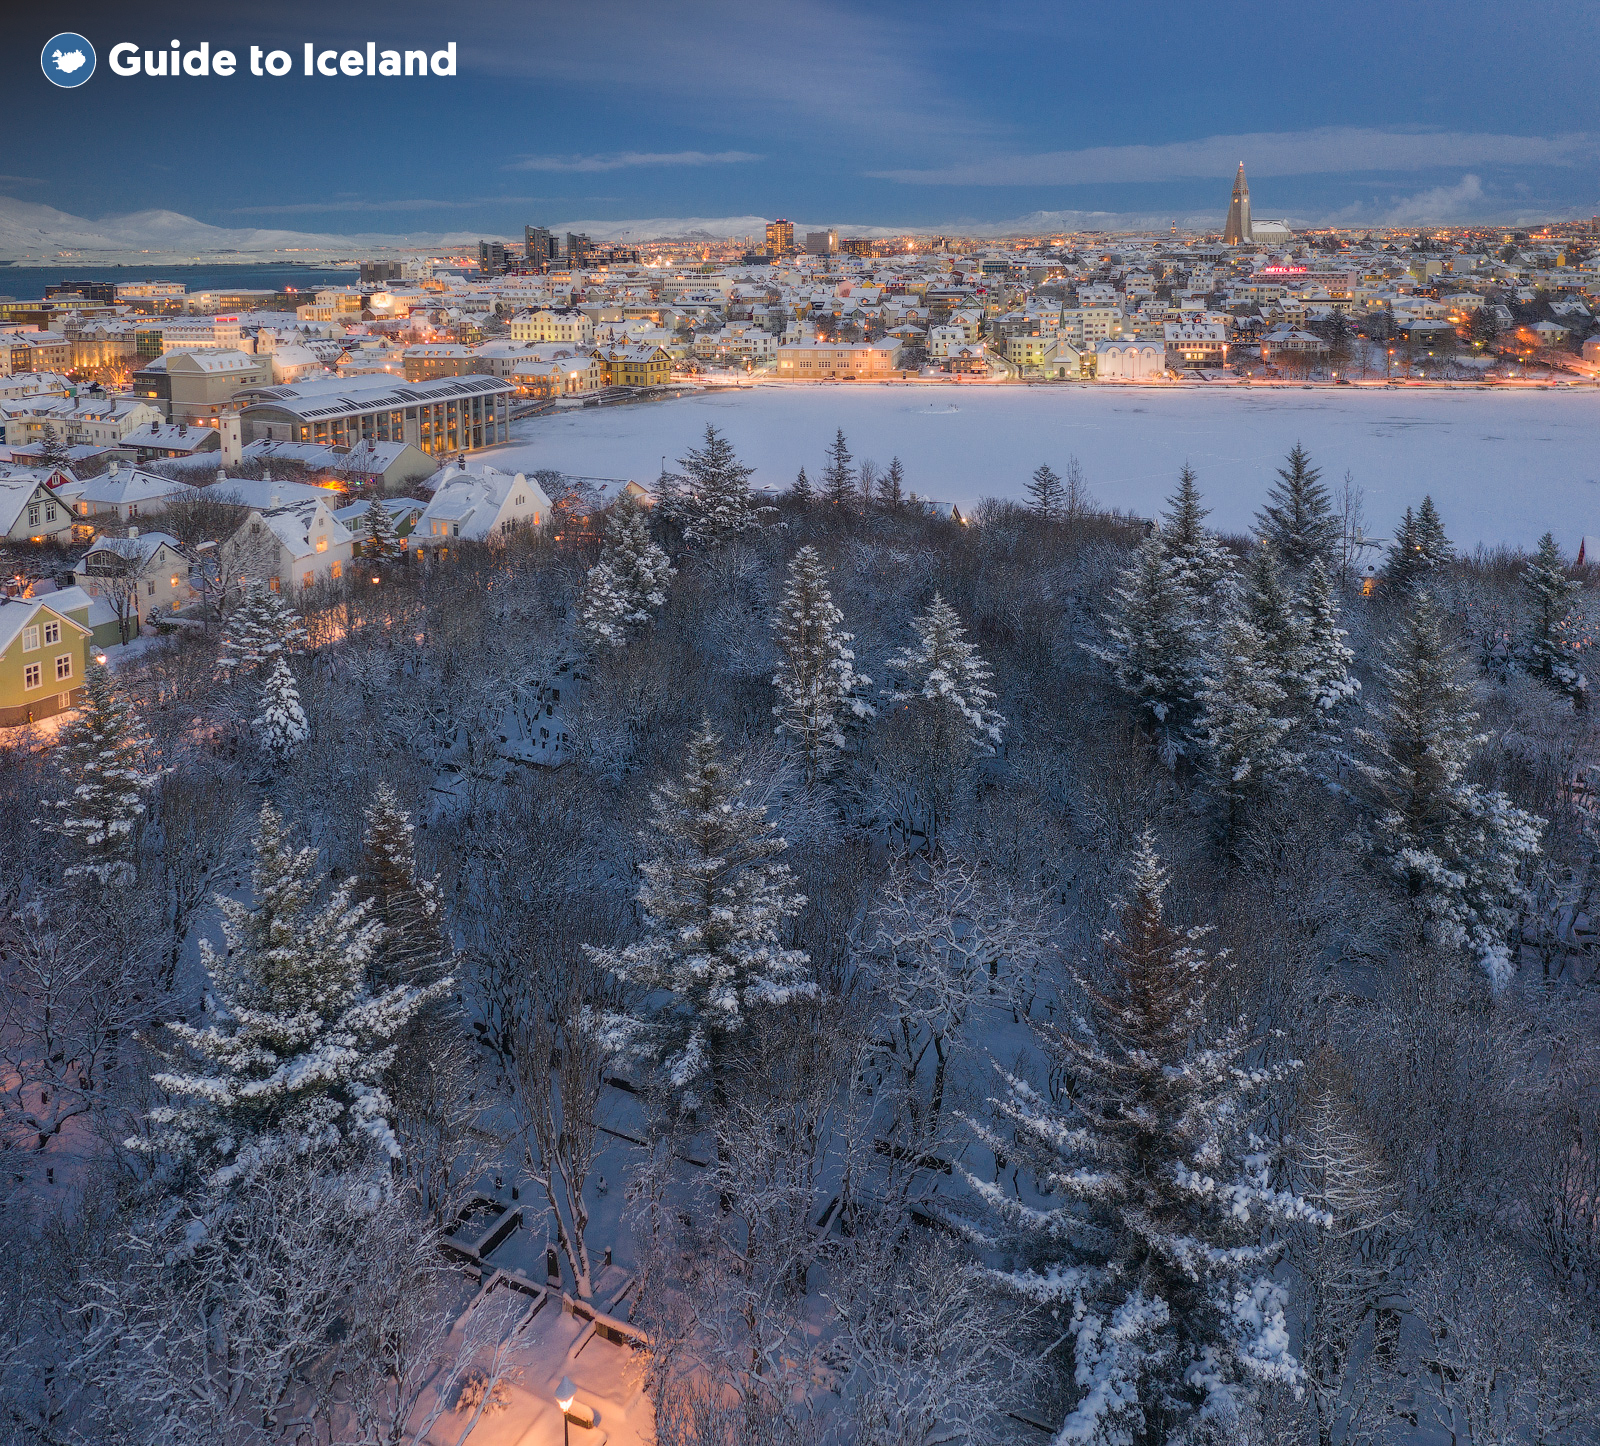 Reykjavík when it's covered in snow and ice during the winter months